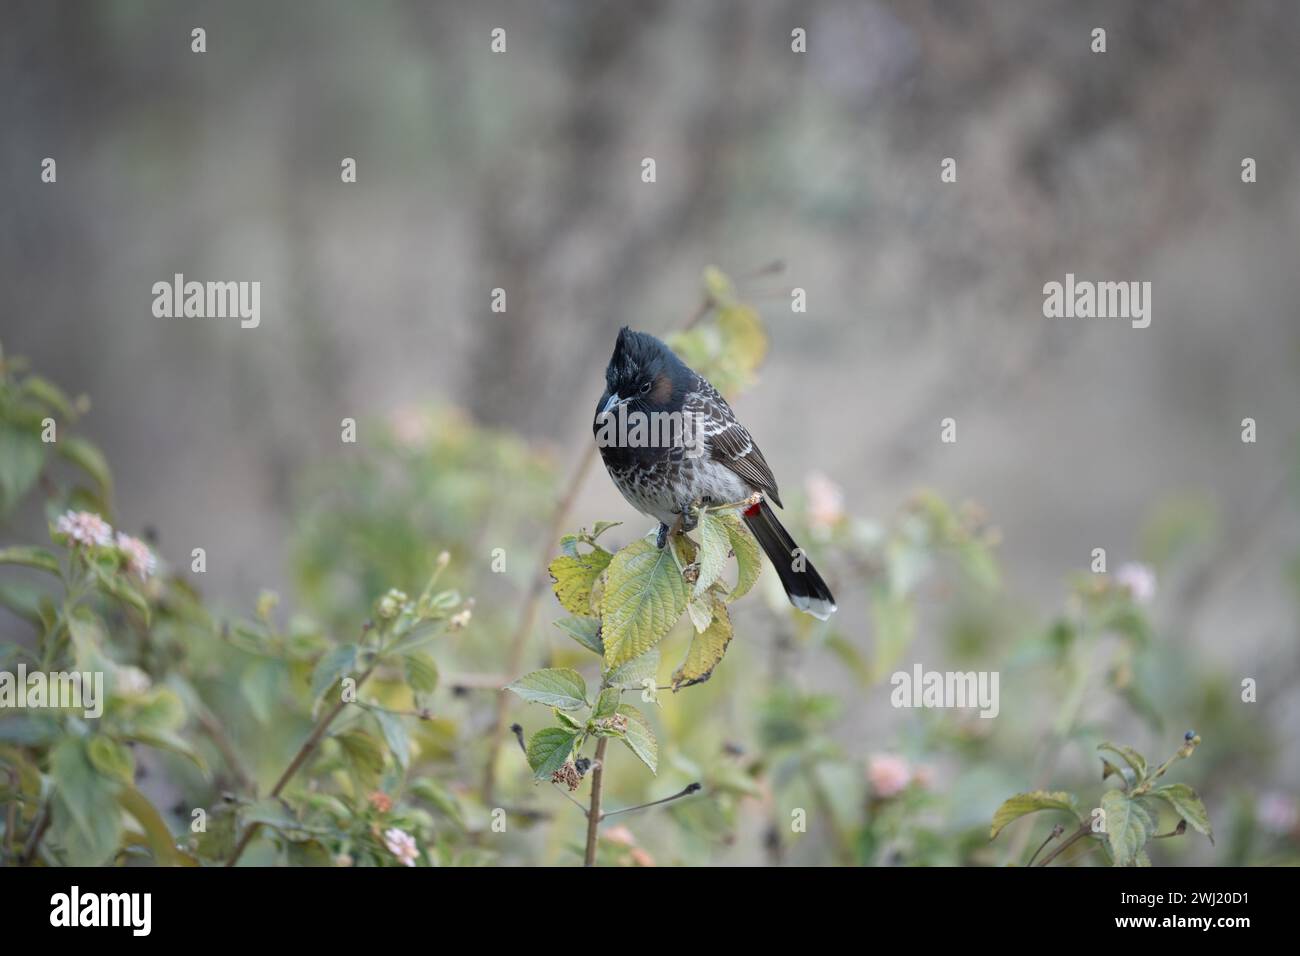 A red vented bulbul perched on a briar stem. Stock Photo